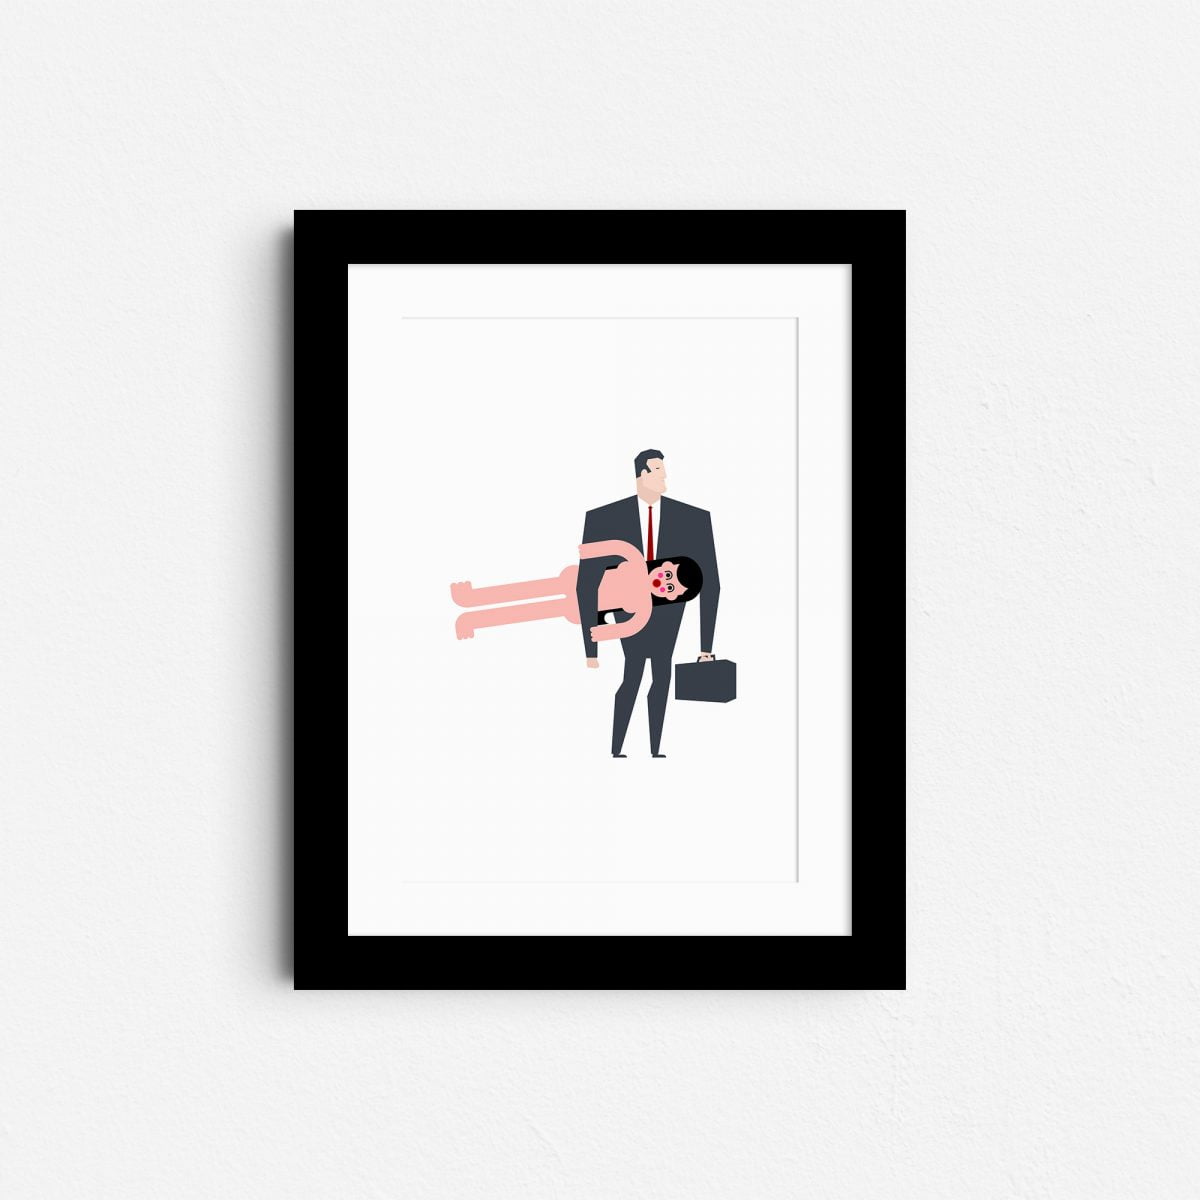 the-lift-a4-nude-erotic-wall-art-framed